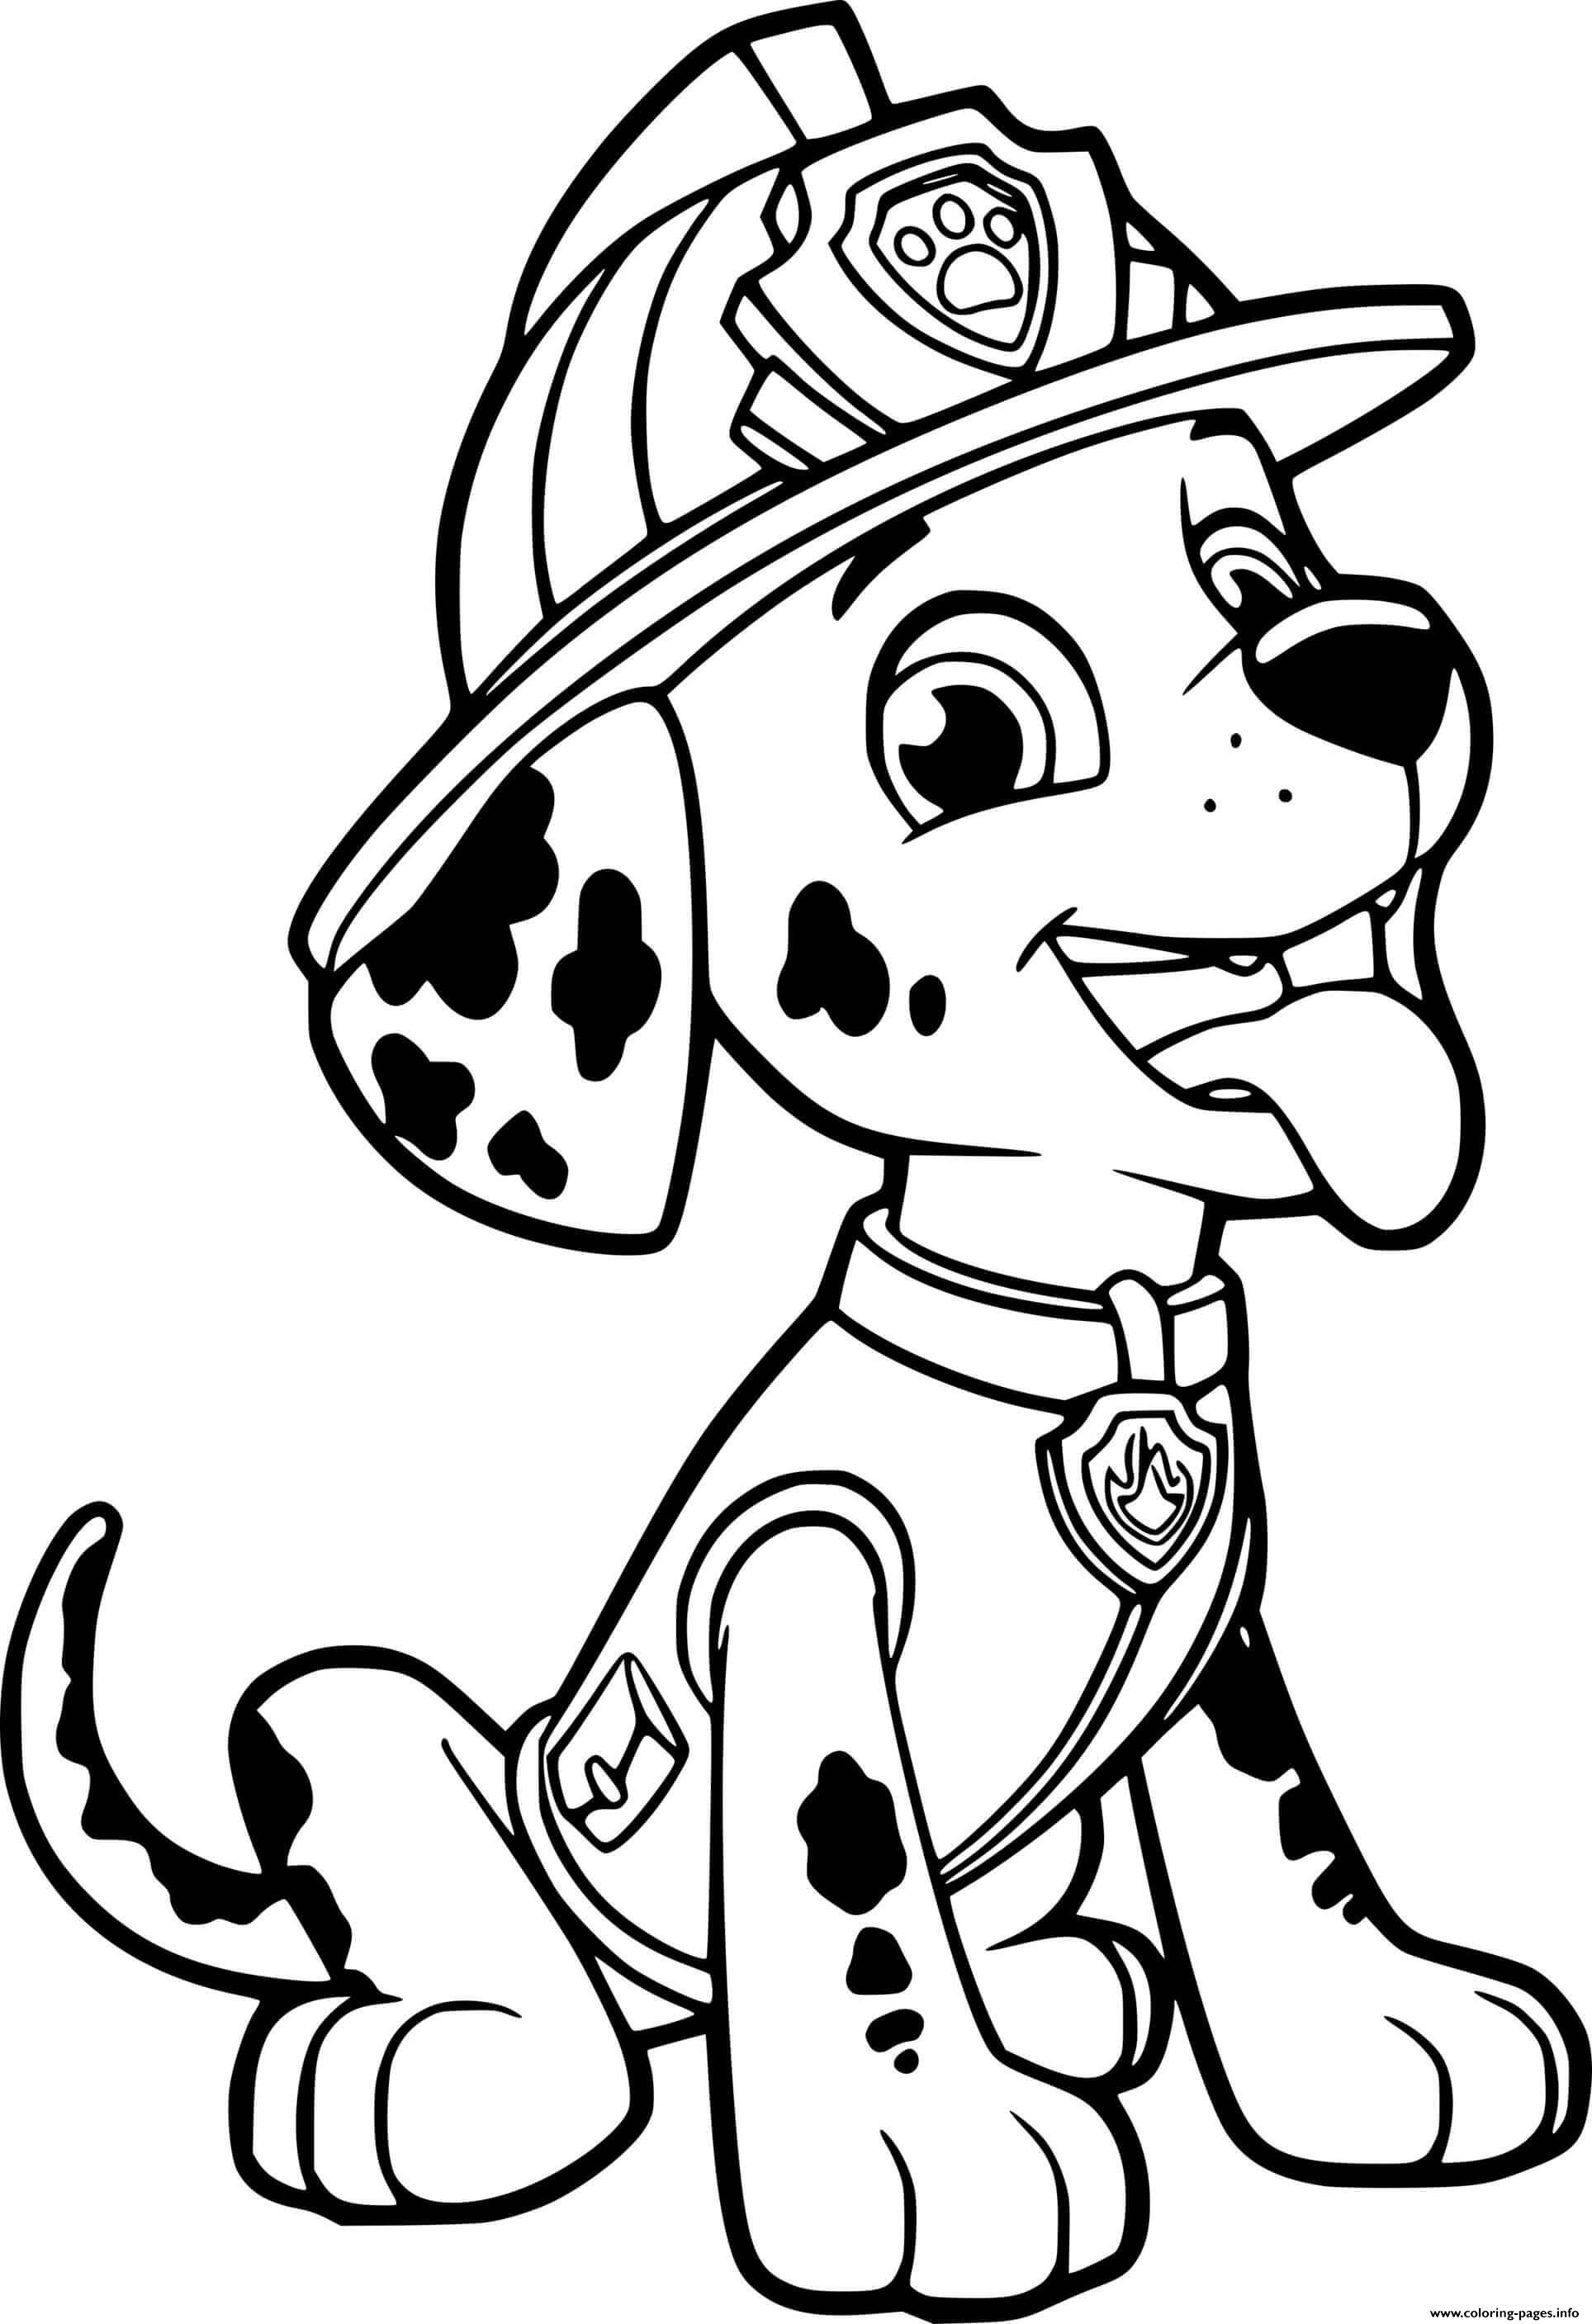 Naughty Marshall From Paw Patrol coloring